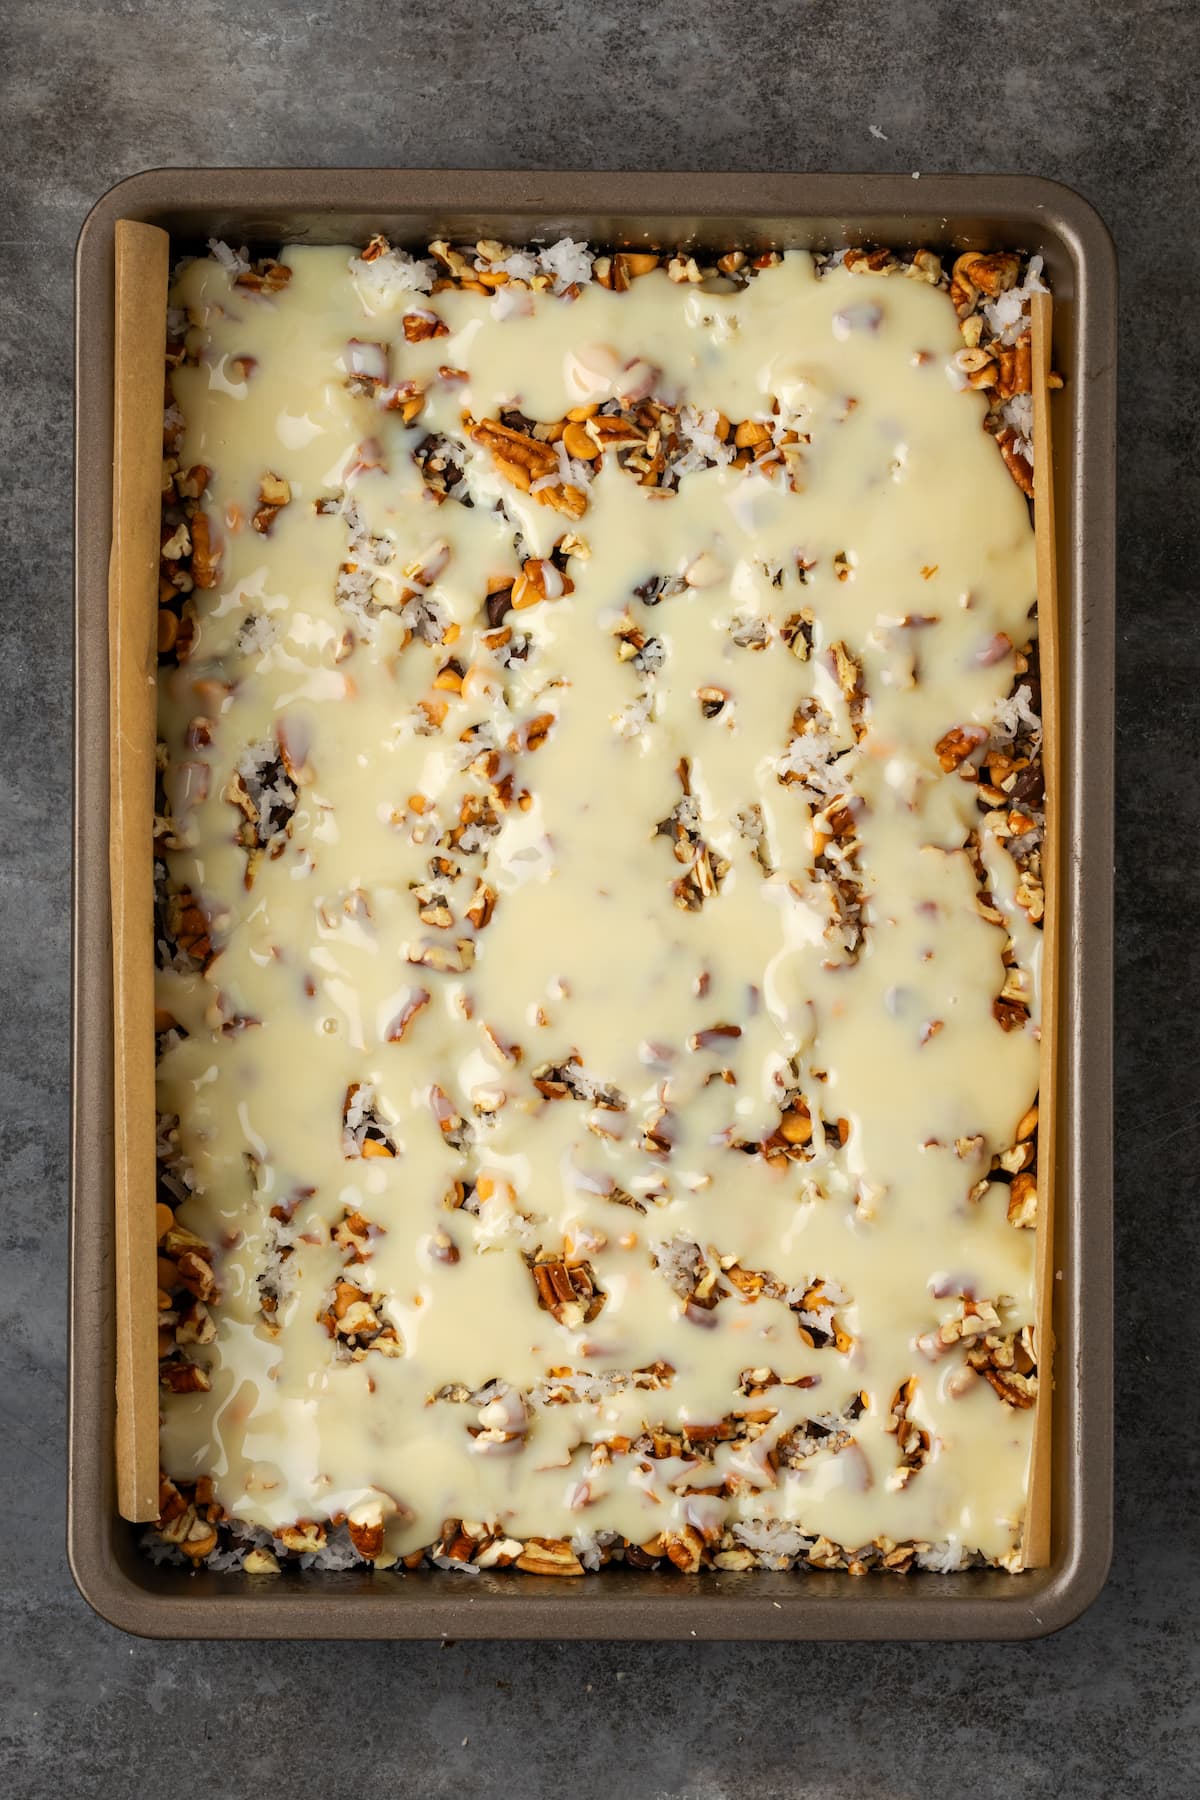 Magic bar ingredients covered with sweetened condensed milk in a lined baking pan.